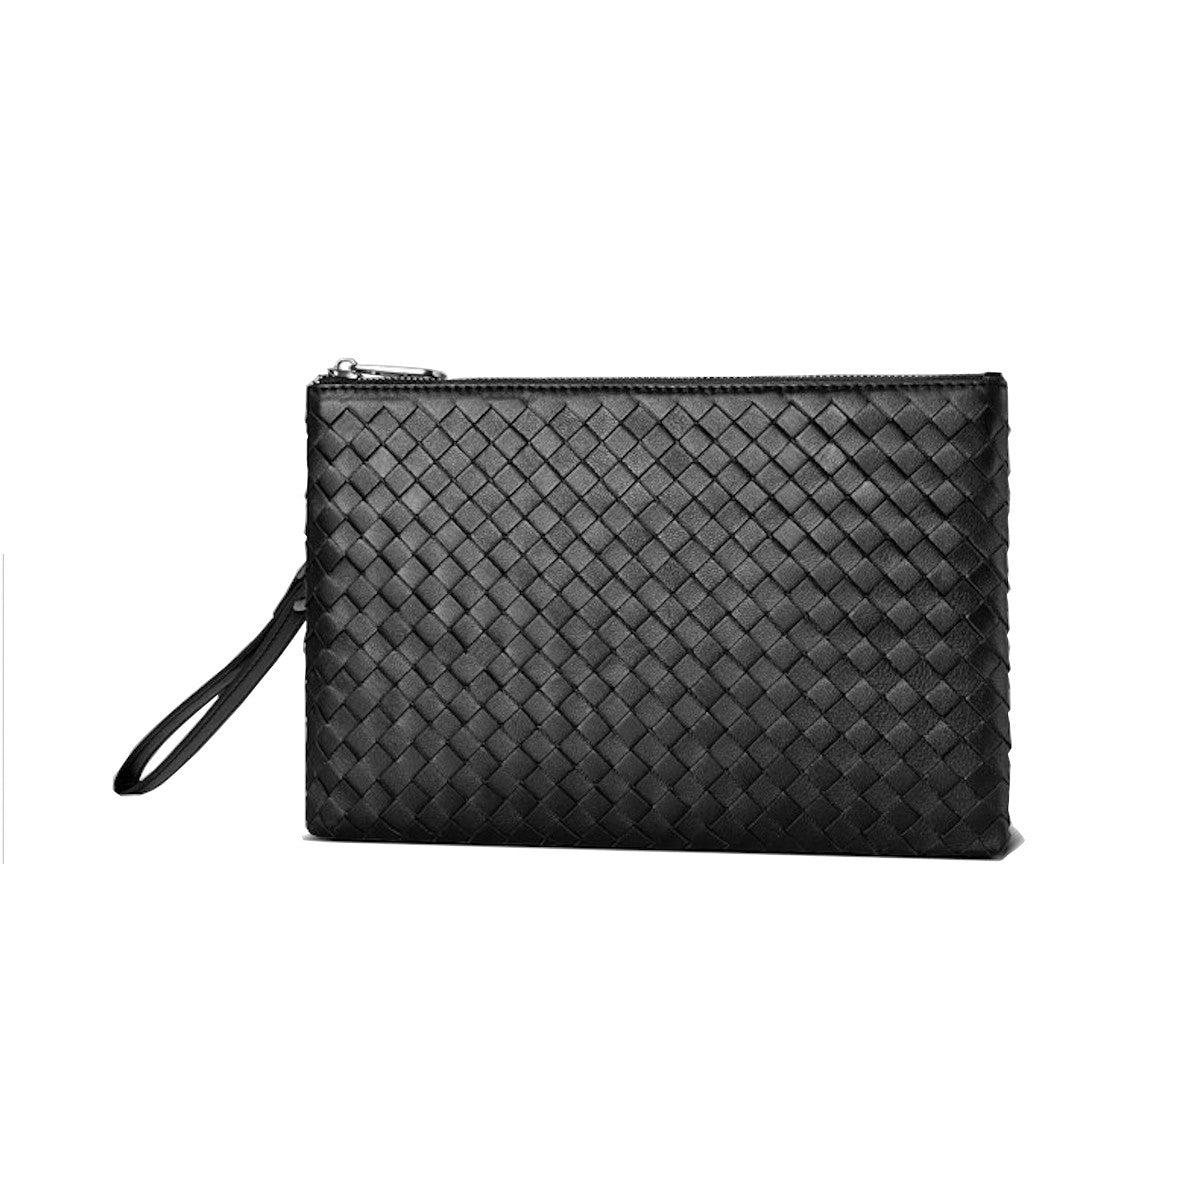 black leather clutch bag tech wallet mens small